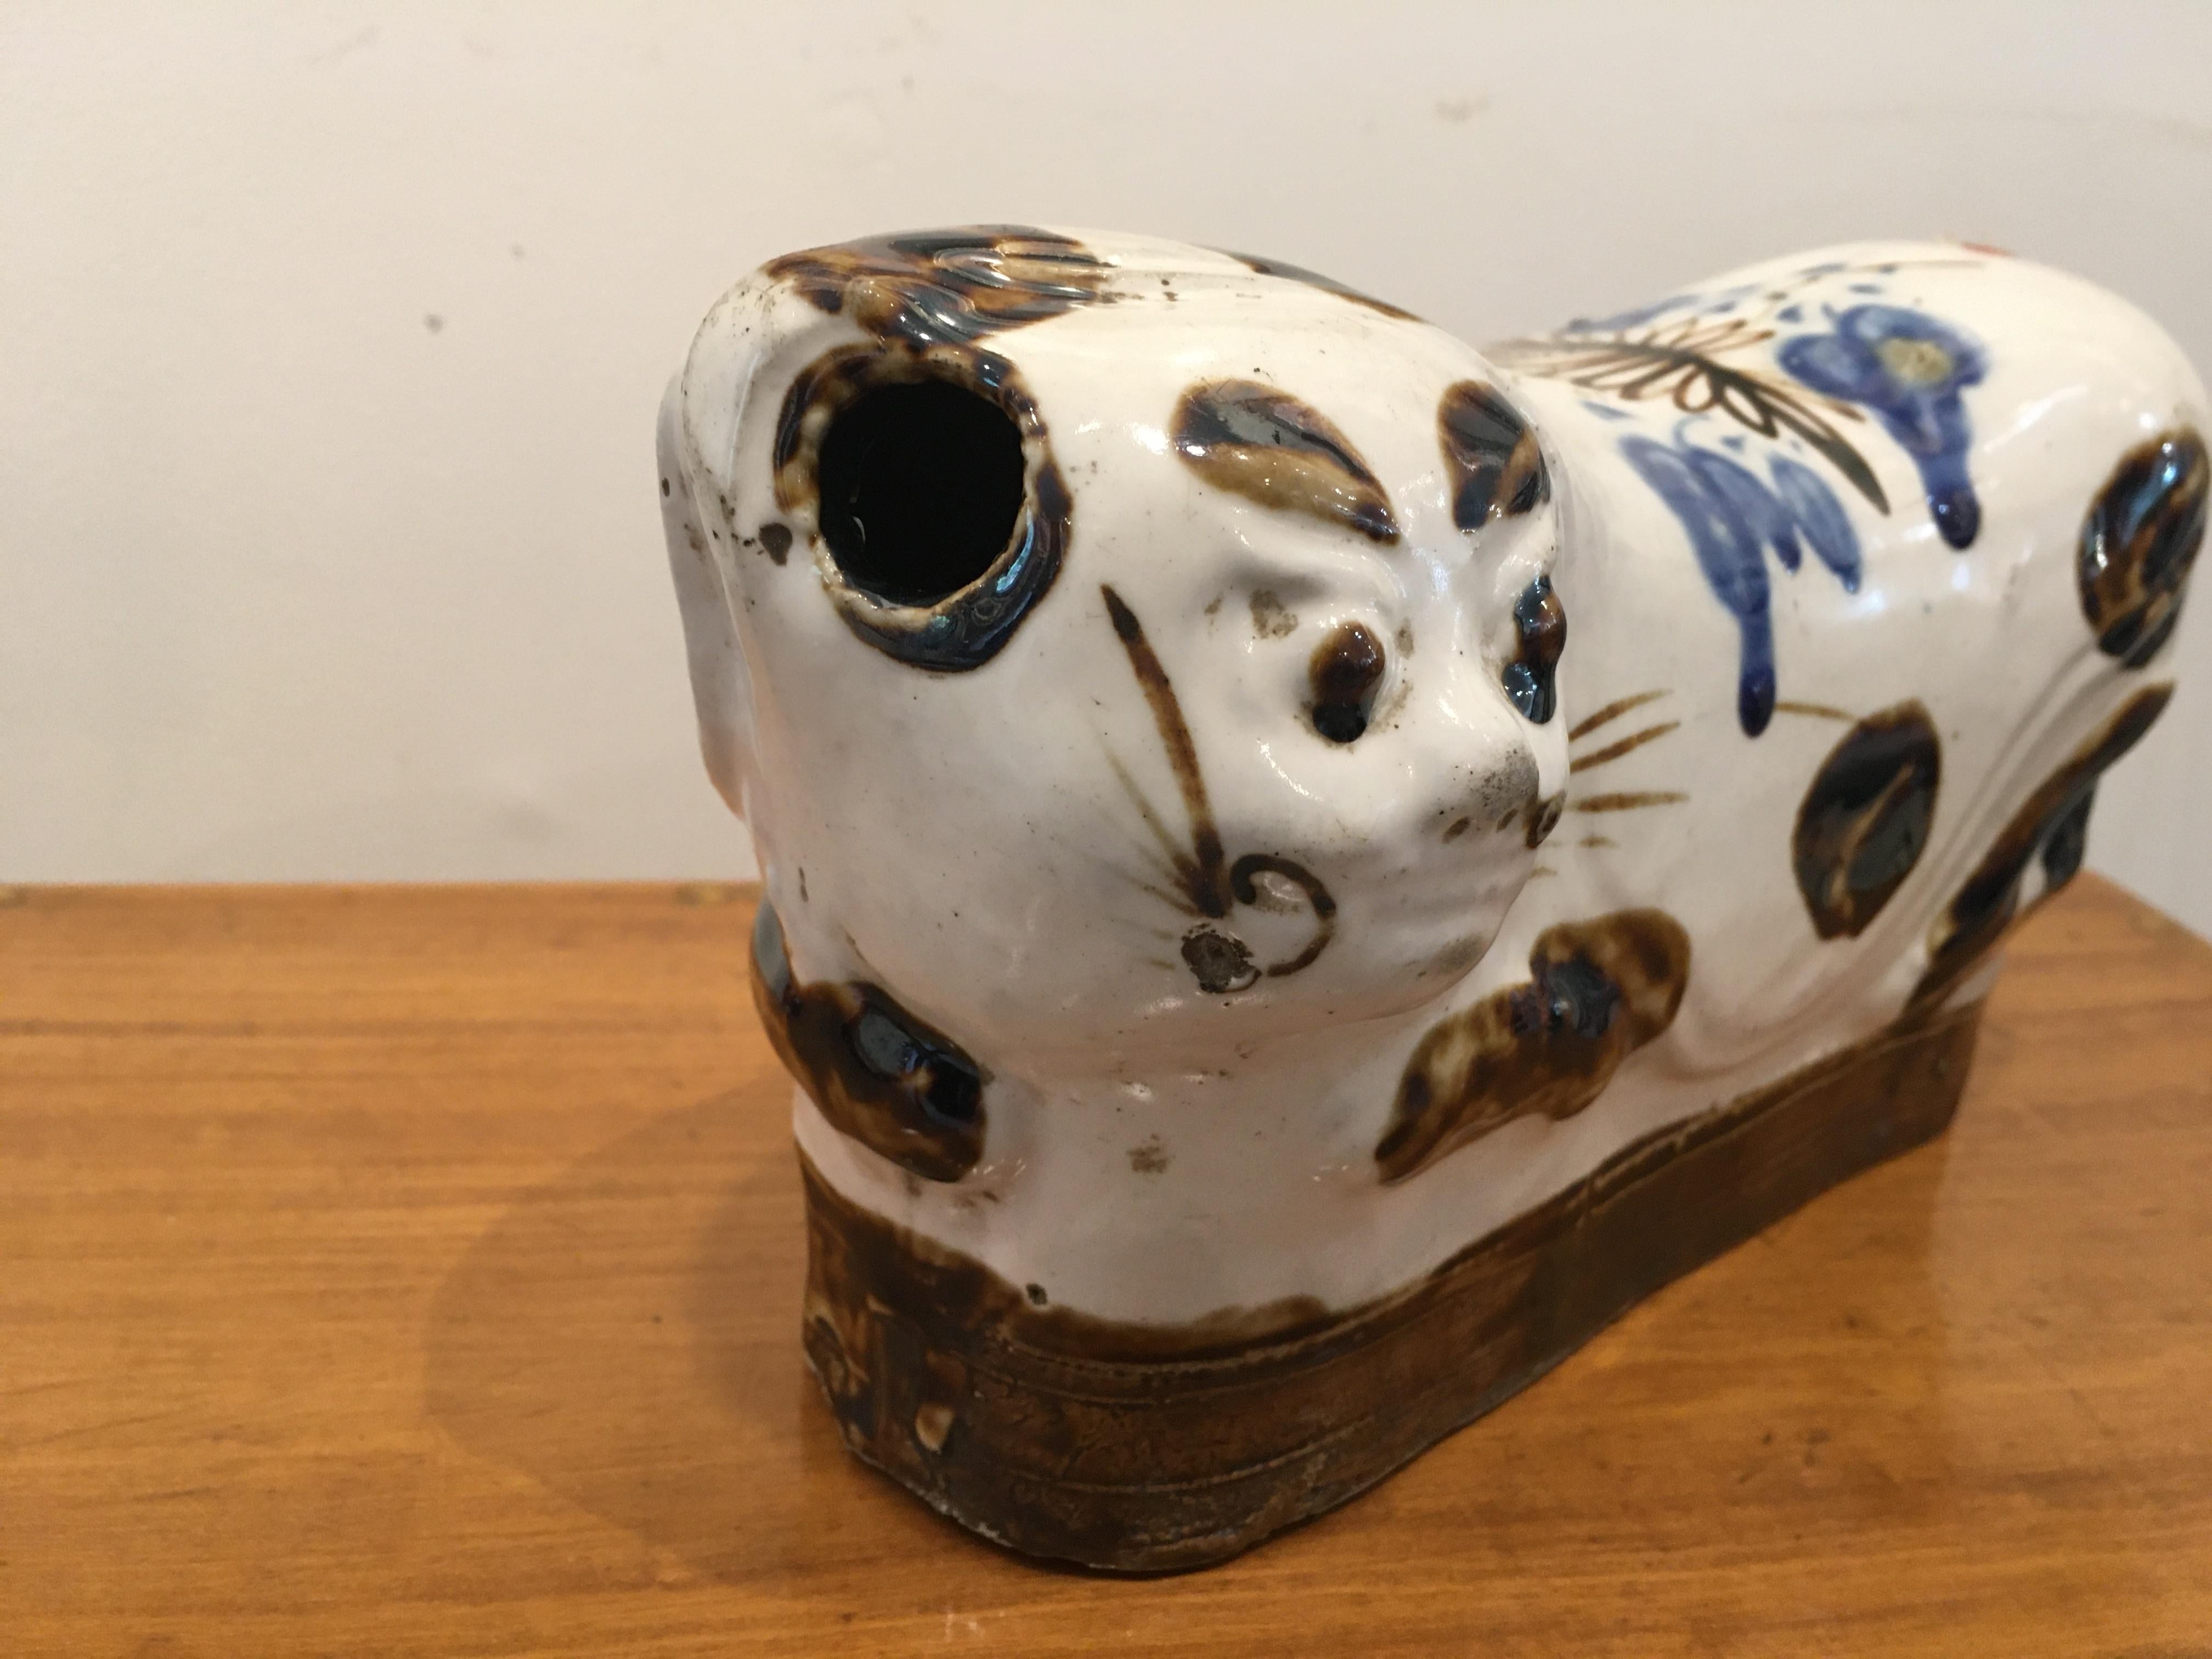 A reclining porcelain cat pillow head rest from the early 1900s, China. These were actually used to keep the spine aligned while sleeping. A production hole at the left side of the head allowed air to escape in order for the piece to maintain its